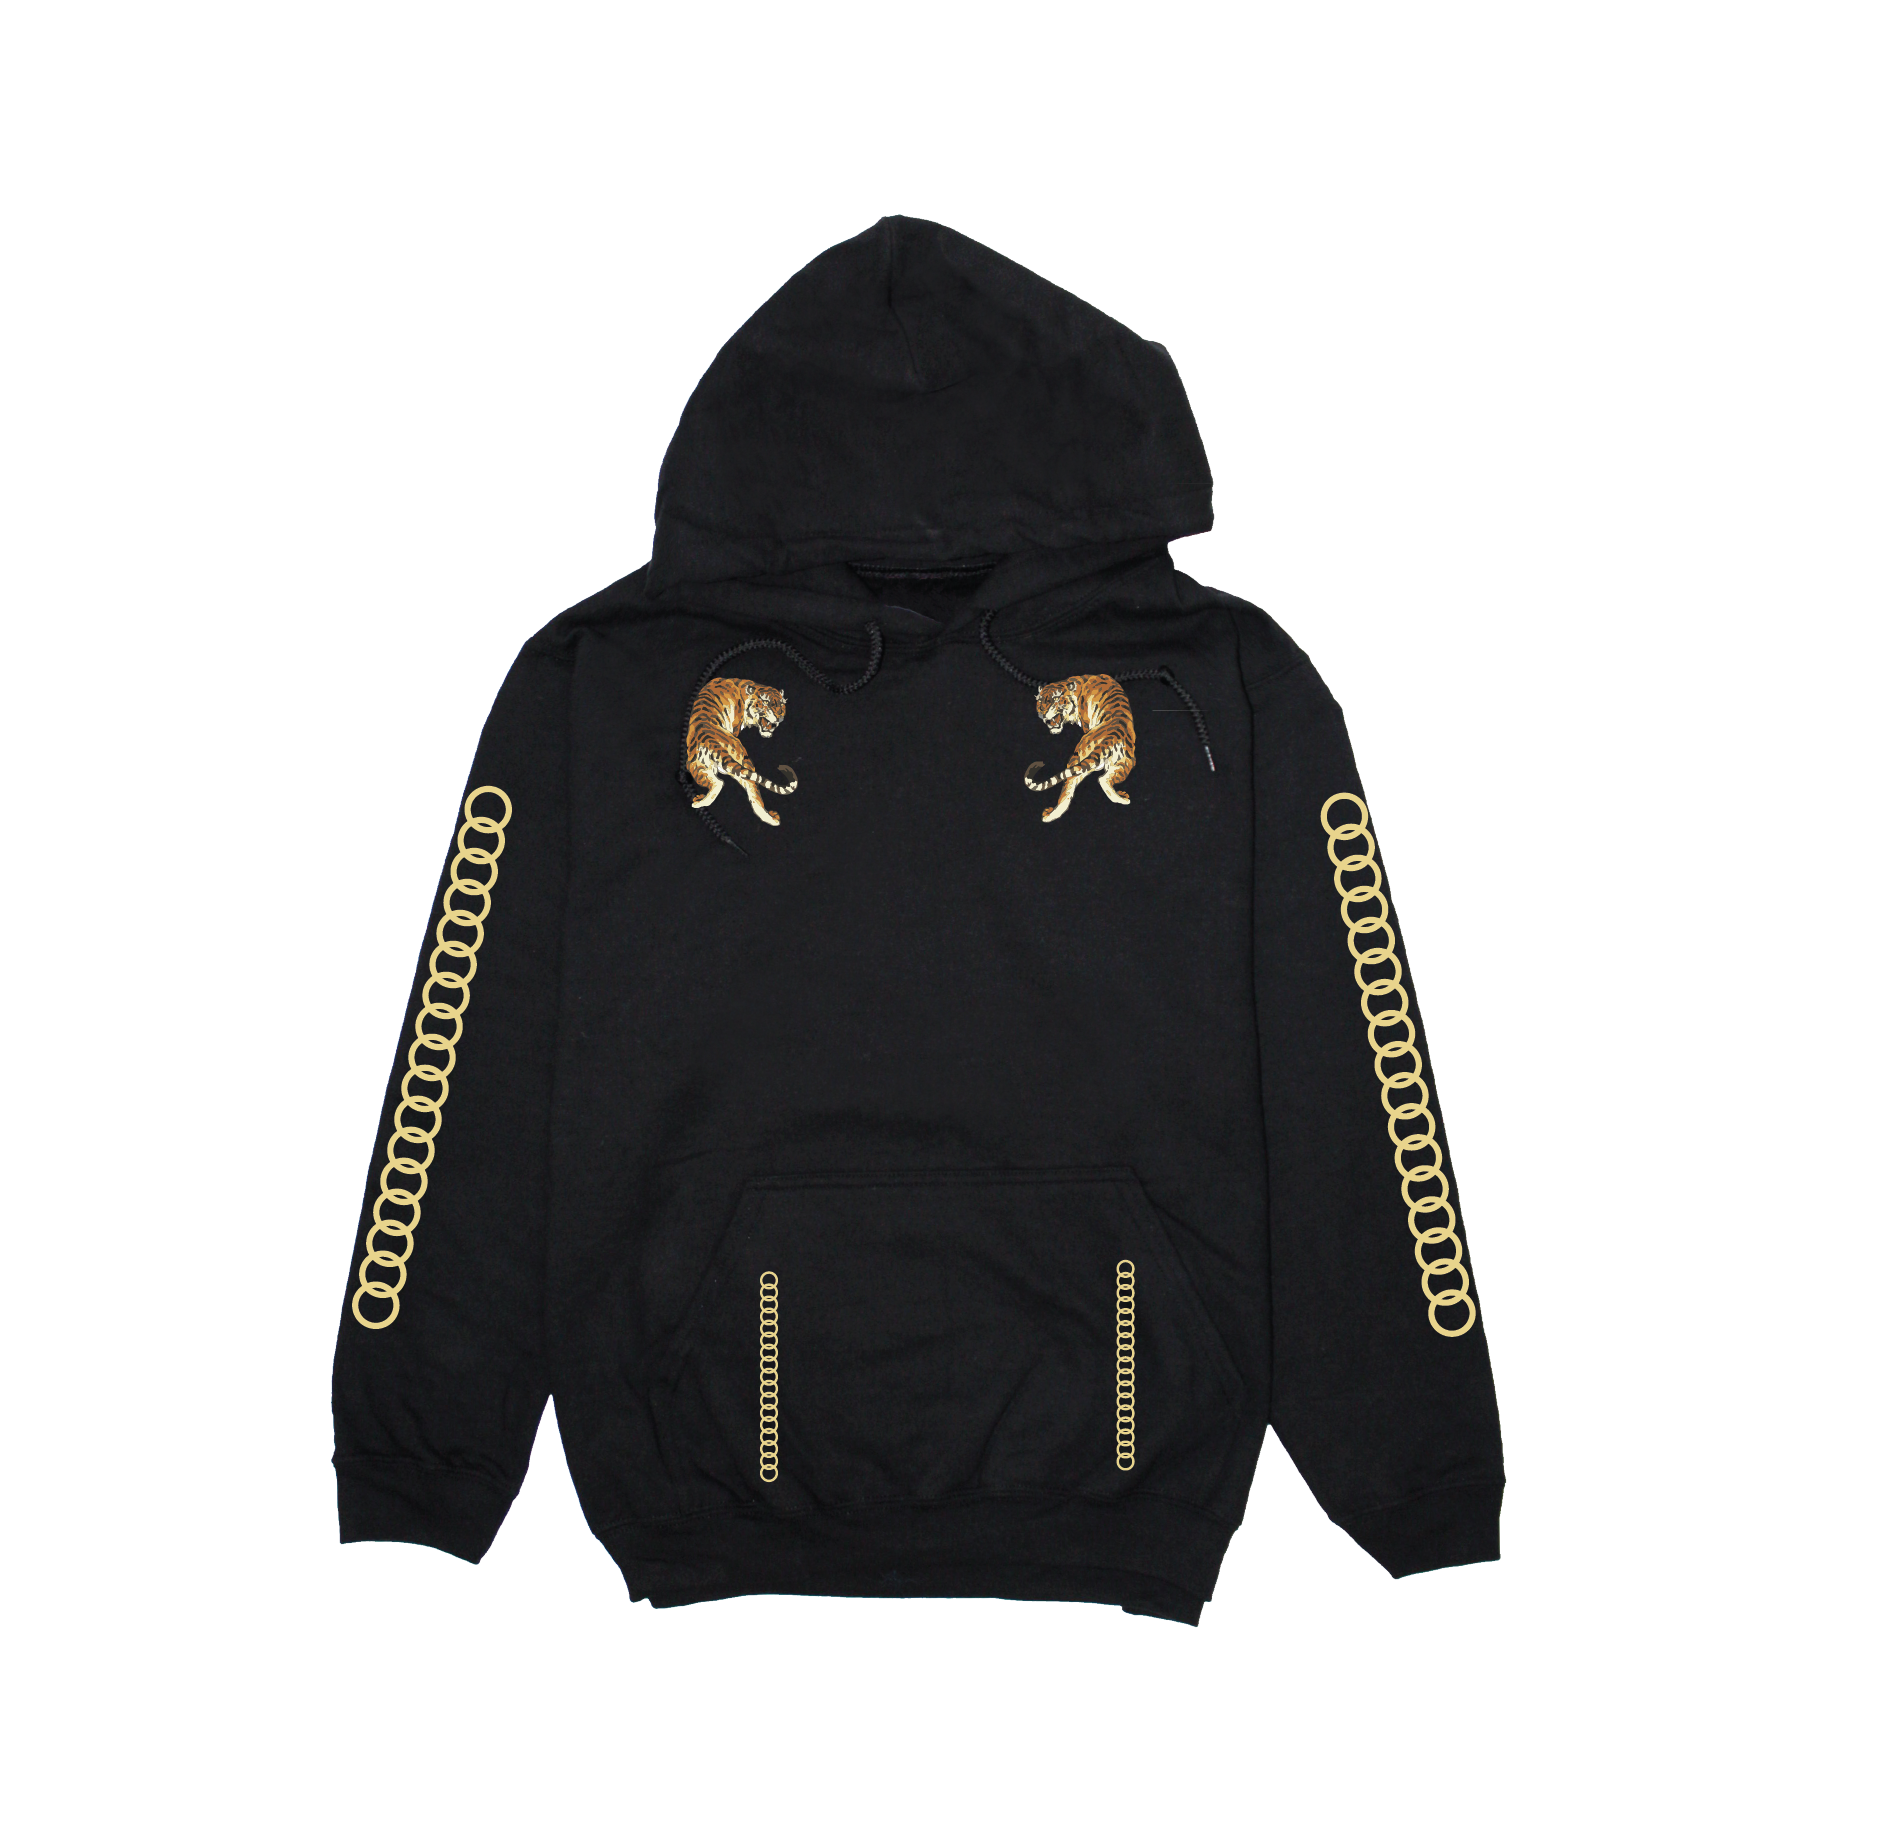 MDS Gold Chaos - Hoodies